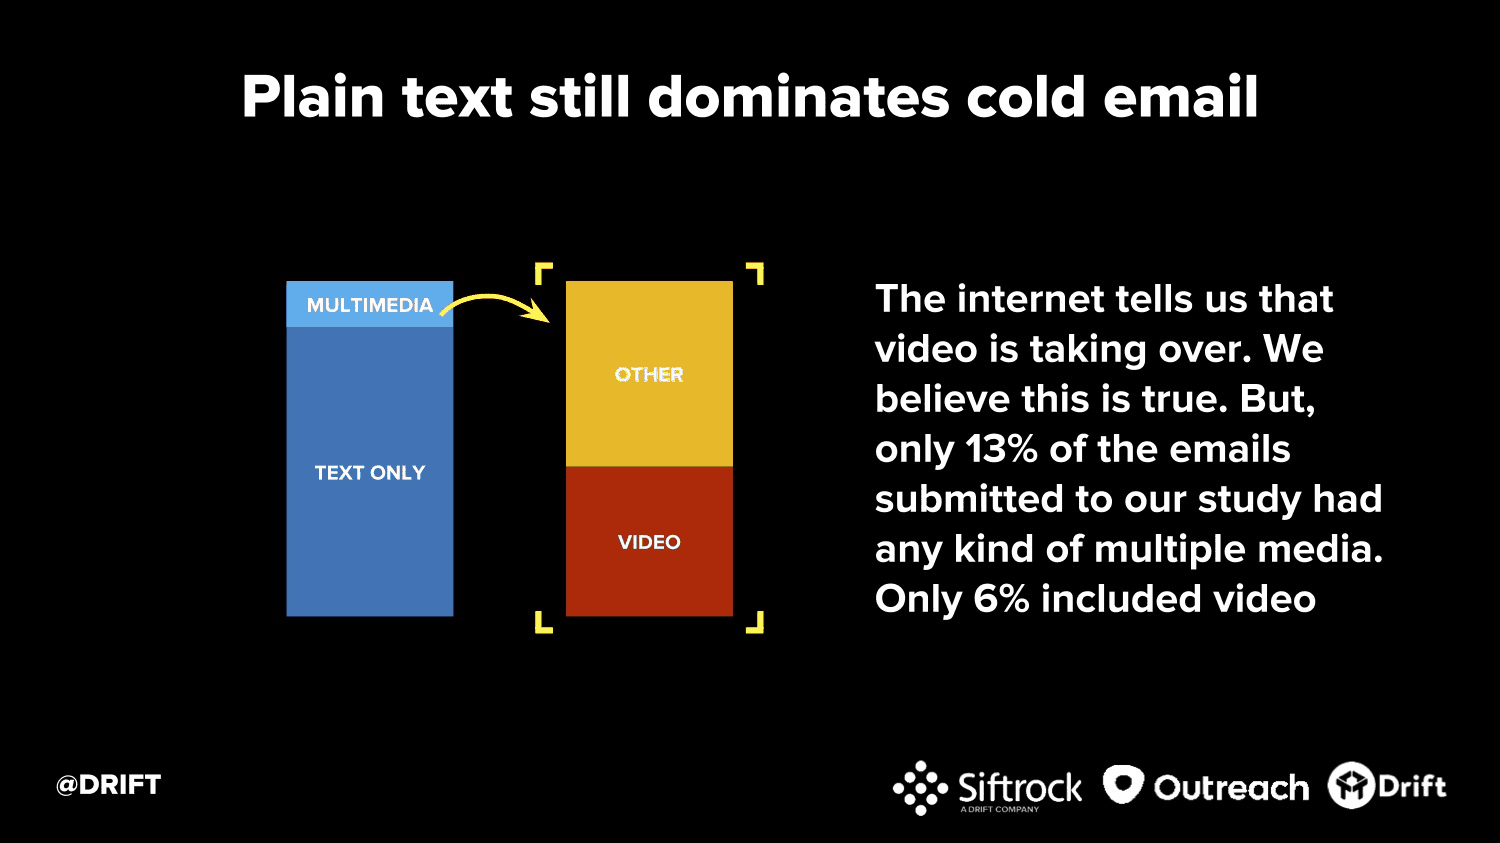 Drift cold email study